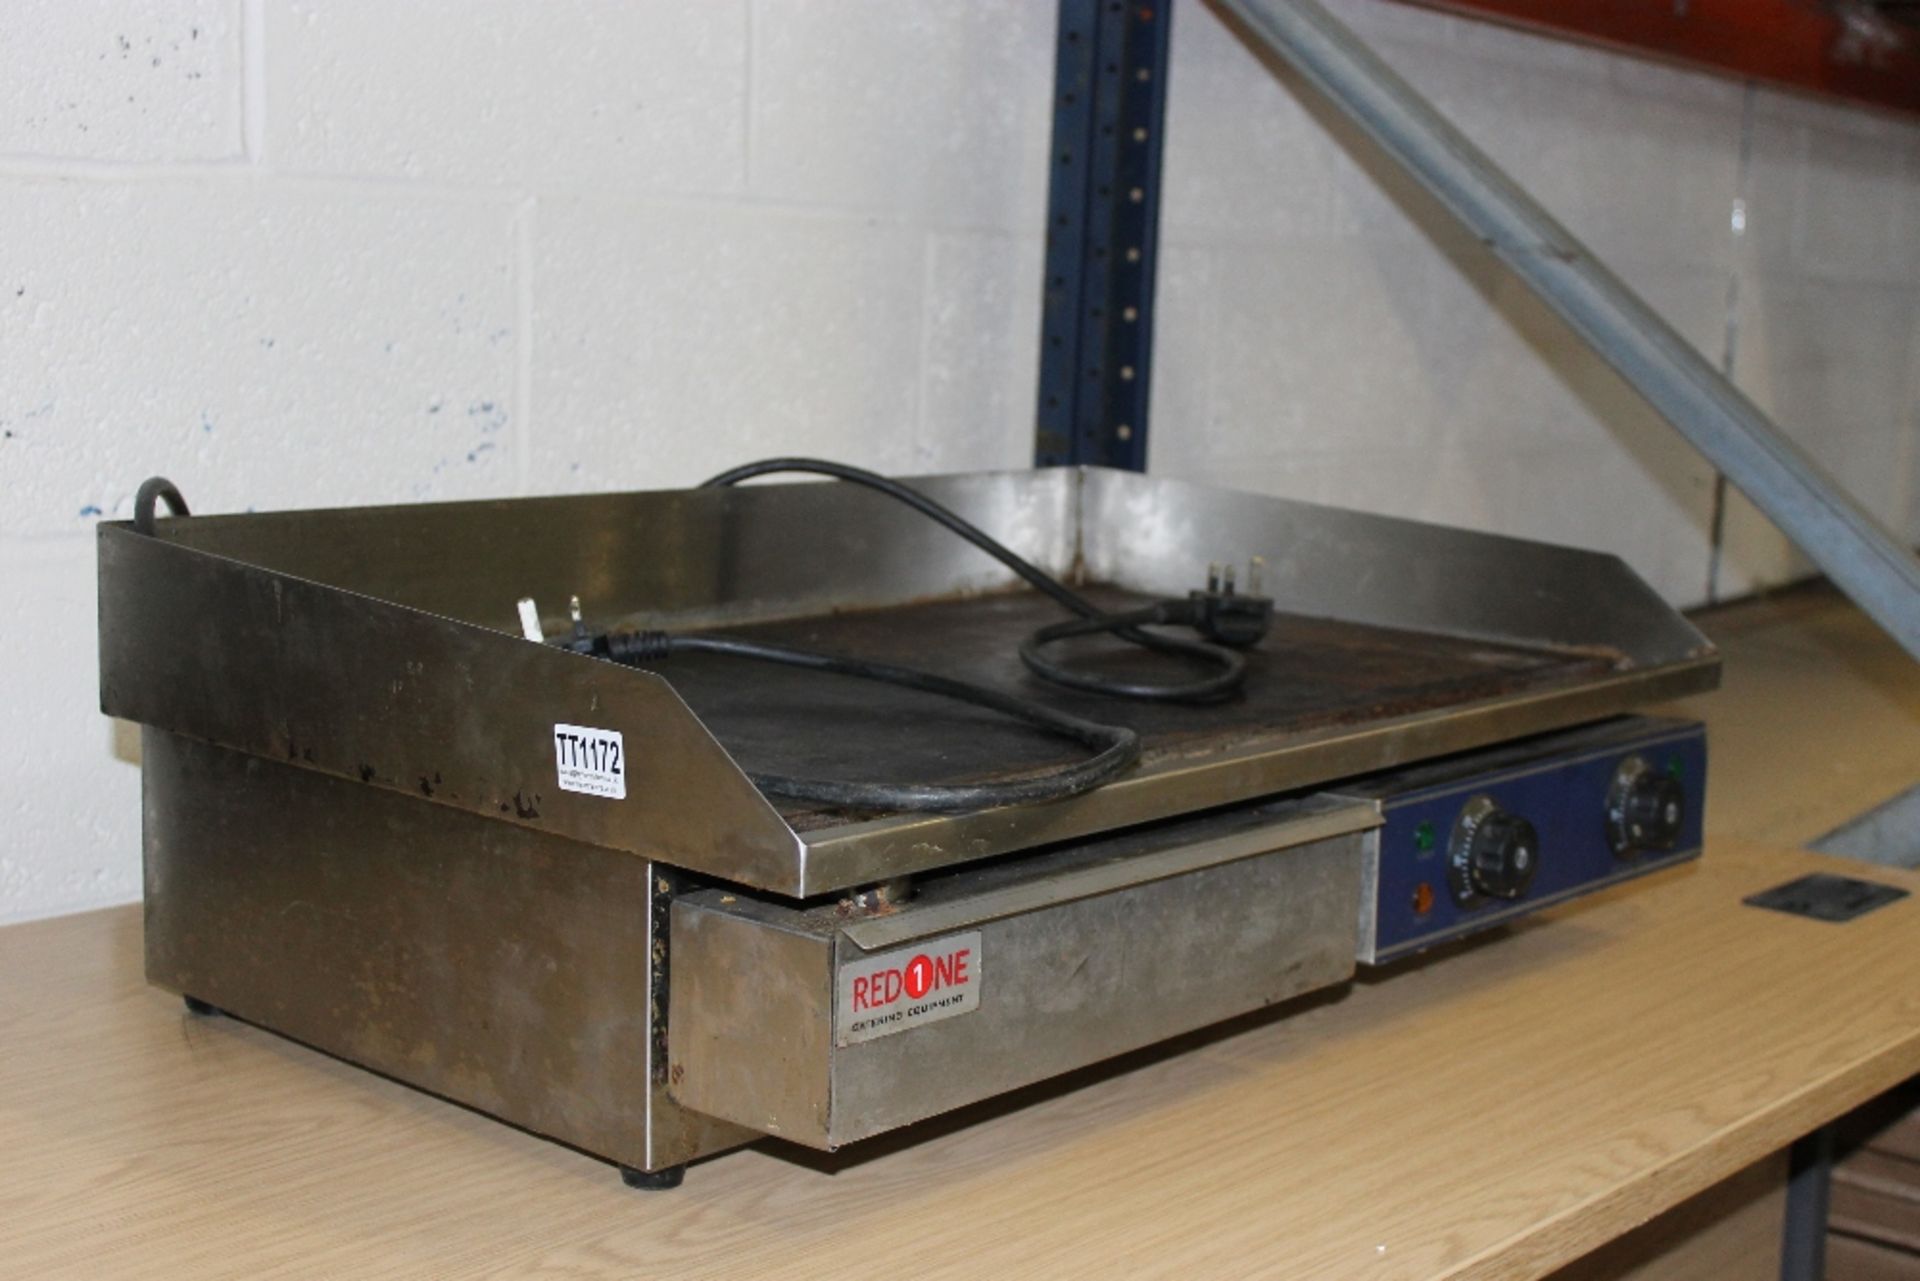 Red One Electric Griddle / Hot Plate -1ph - Tested Working - Image 2 of 3